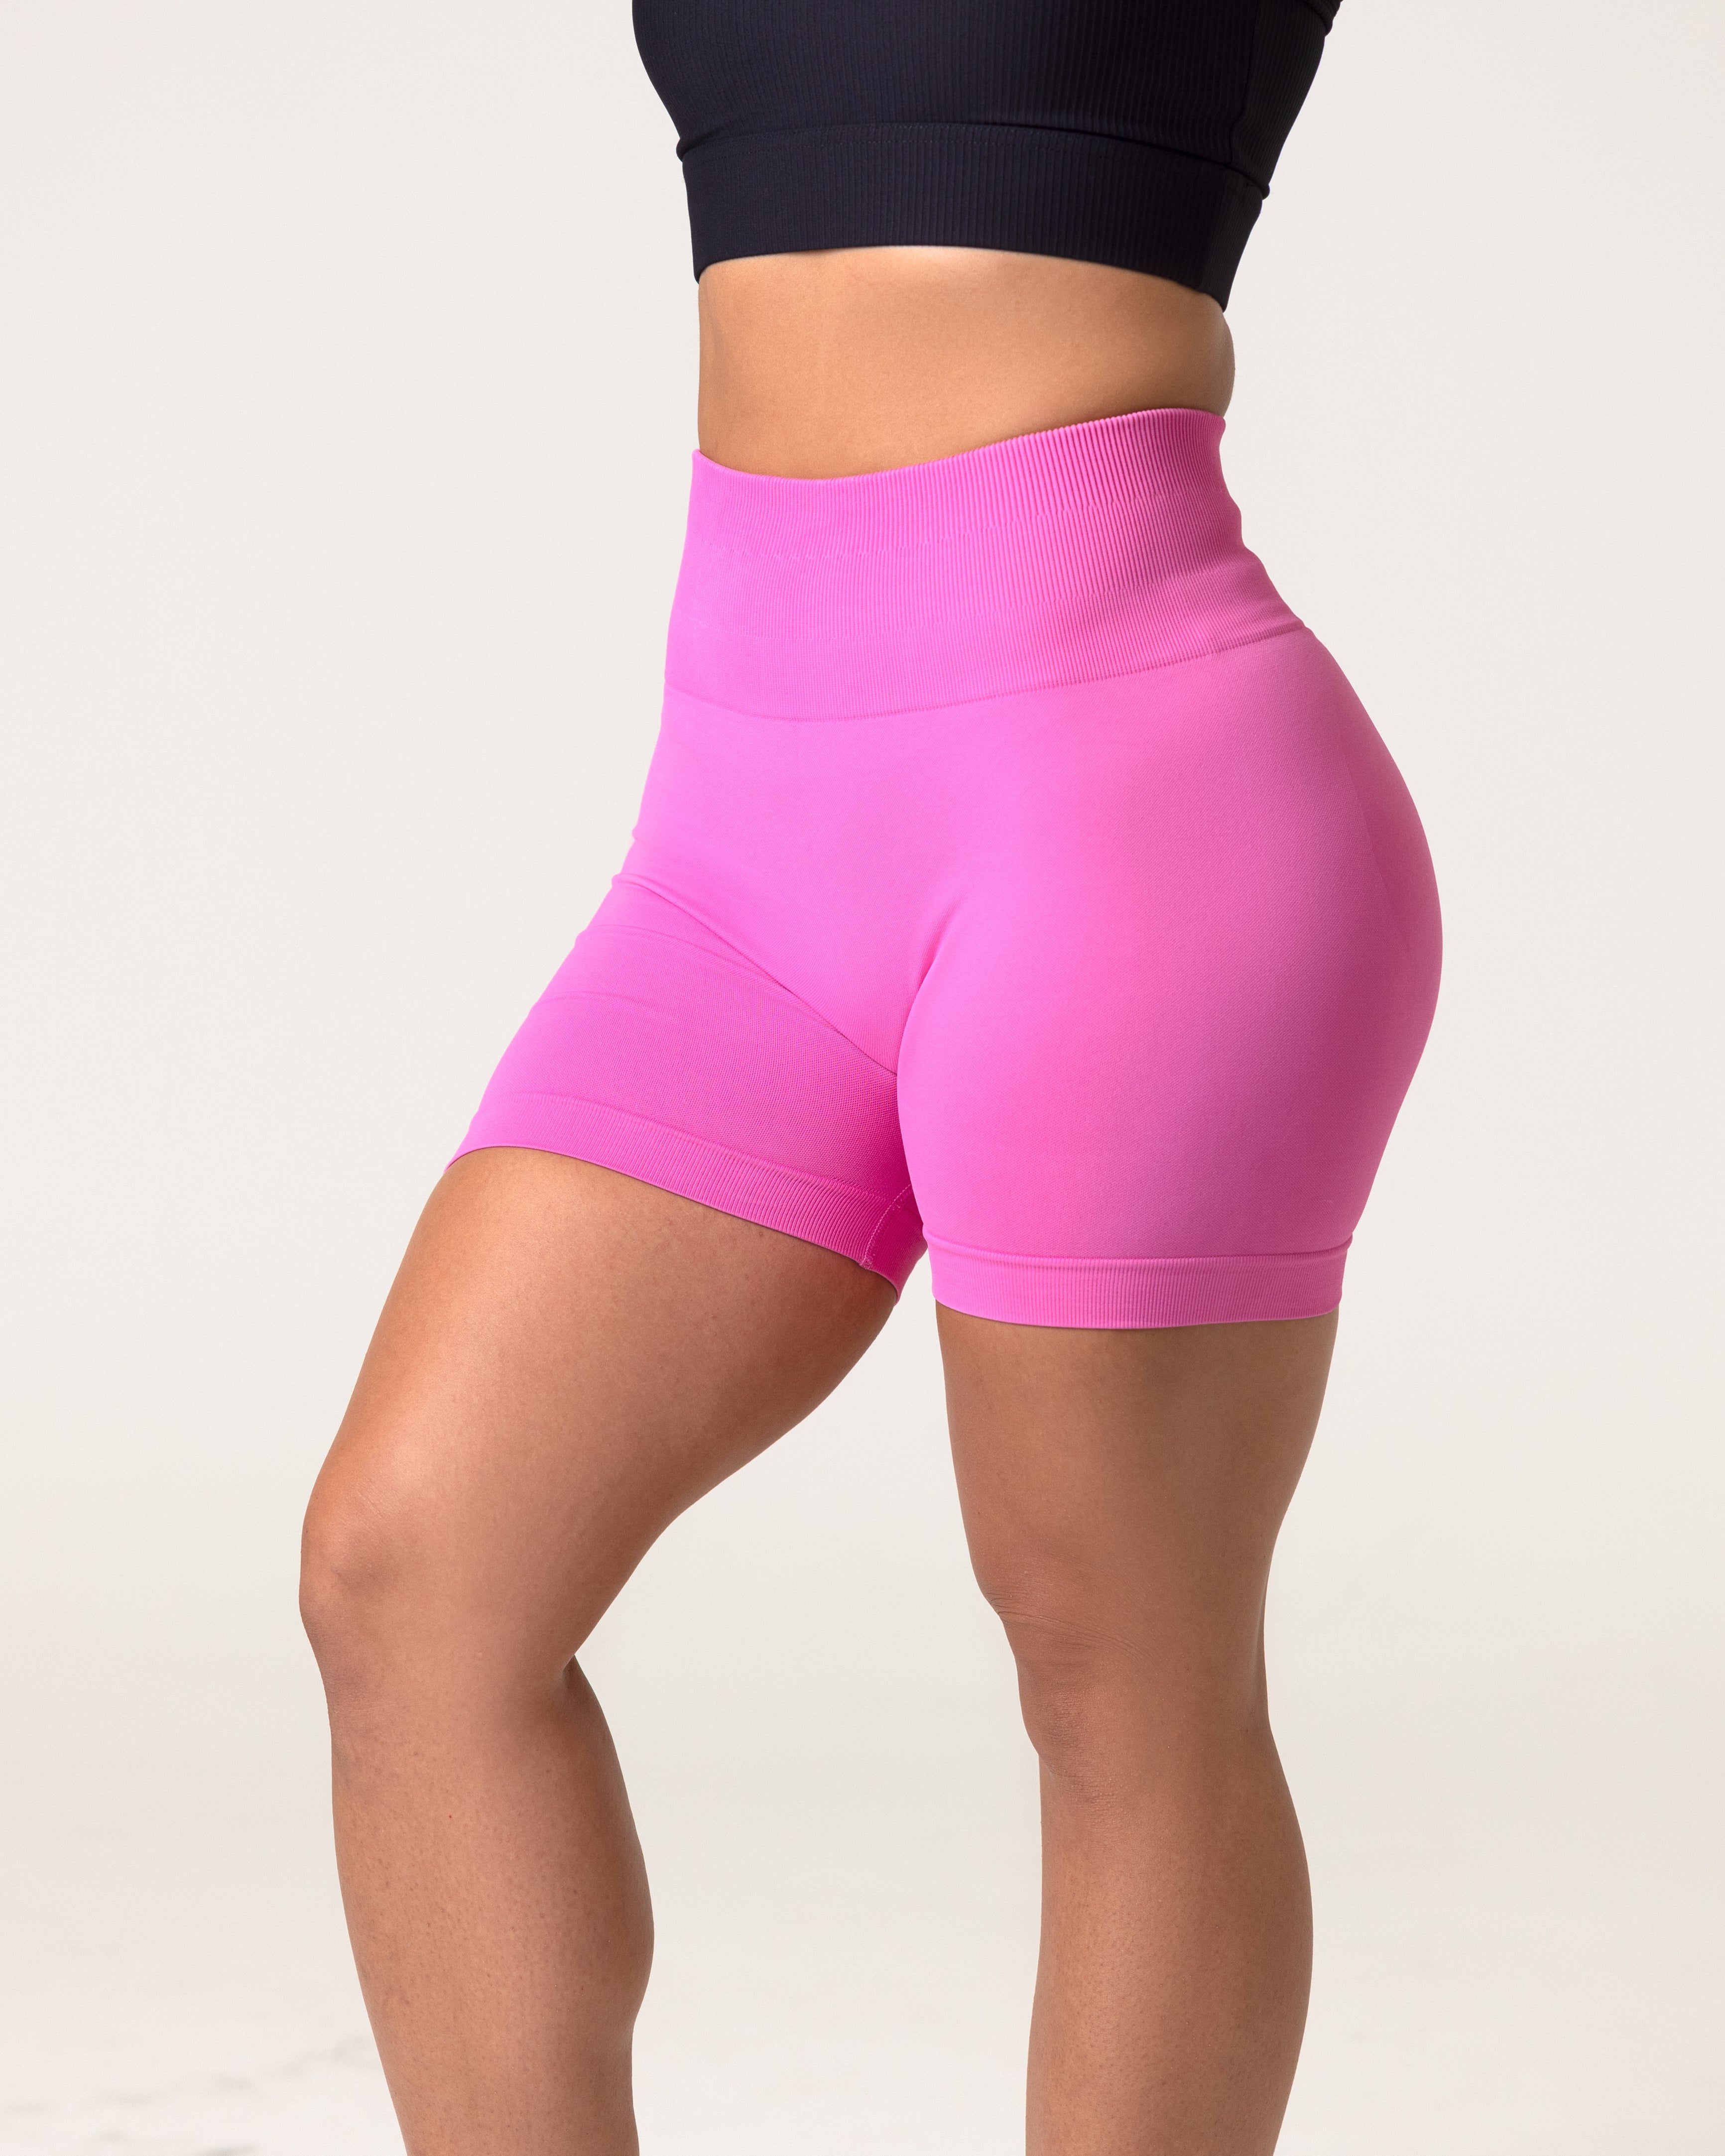 Womens Active Butt Seamless Gym Shorts With Scrunch Butt And Push